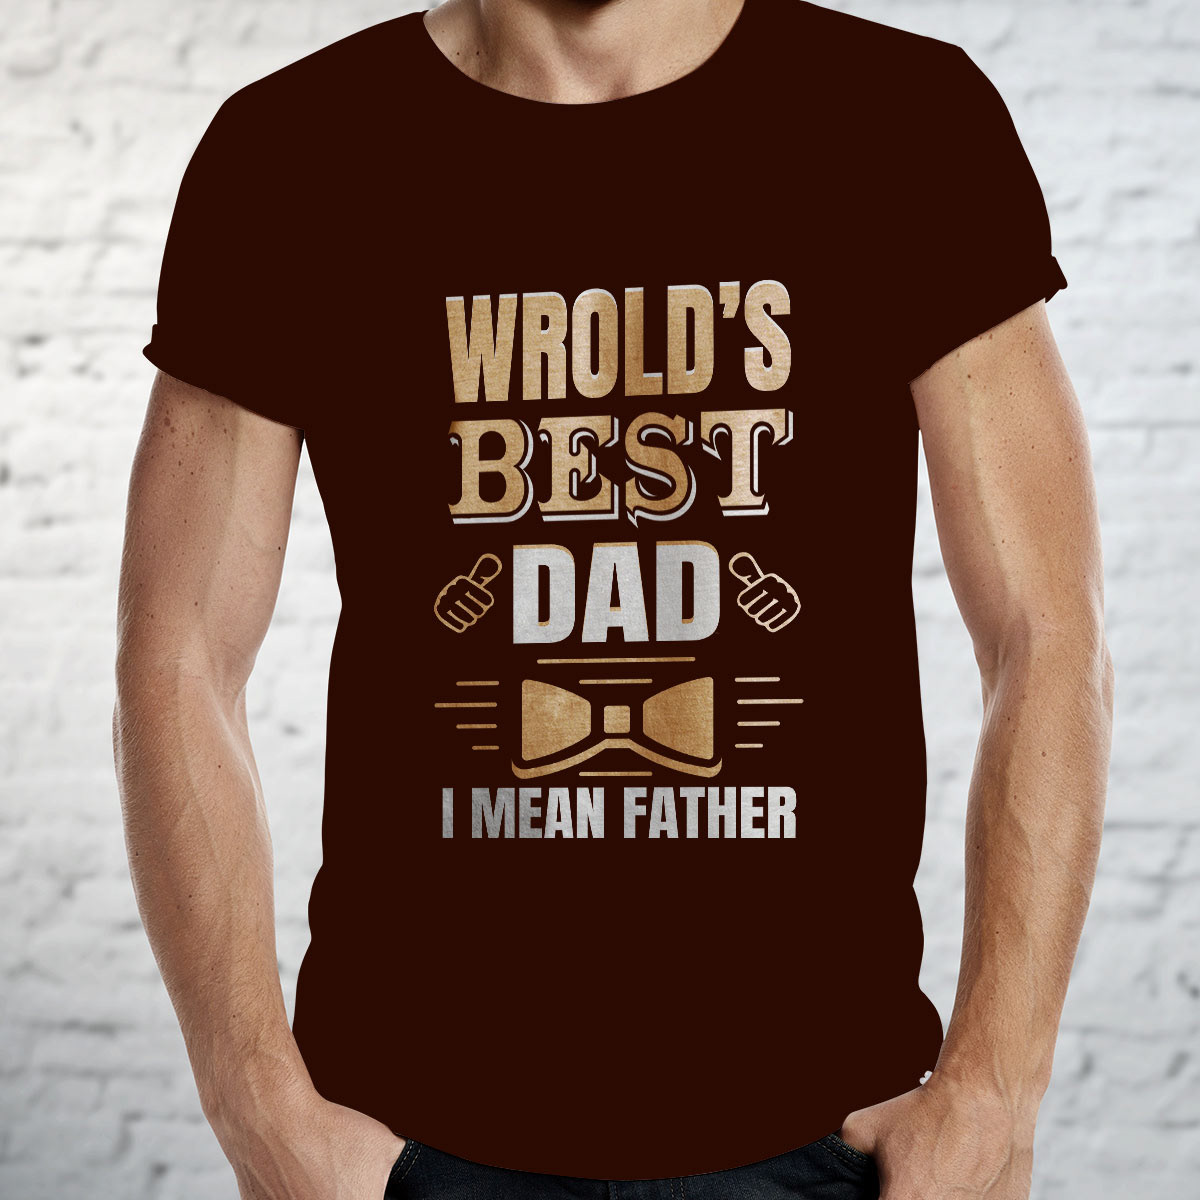 father t shirt Father's day t shirt